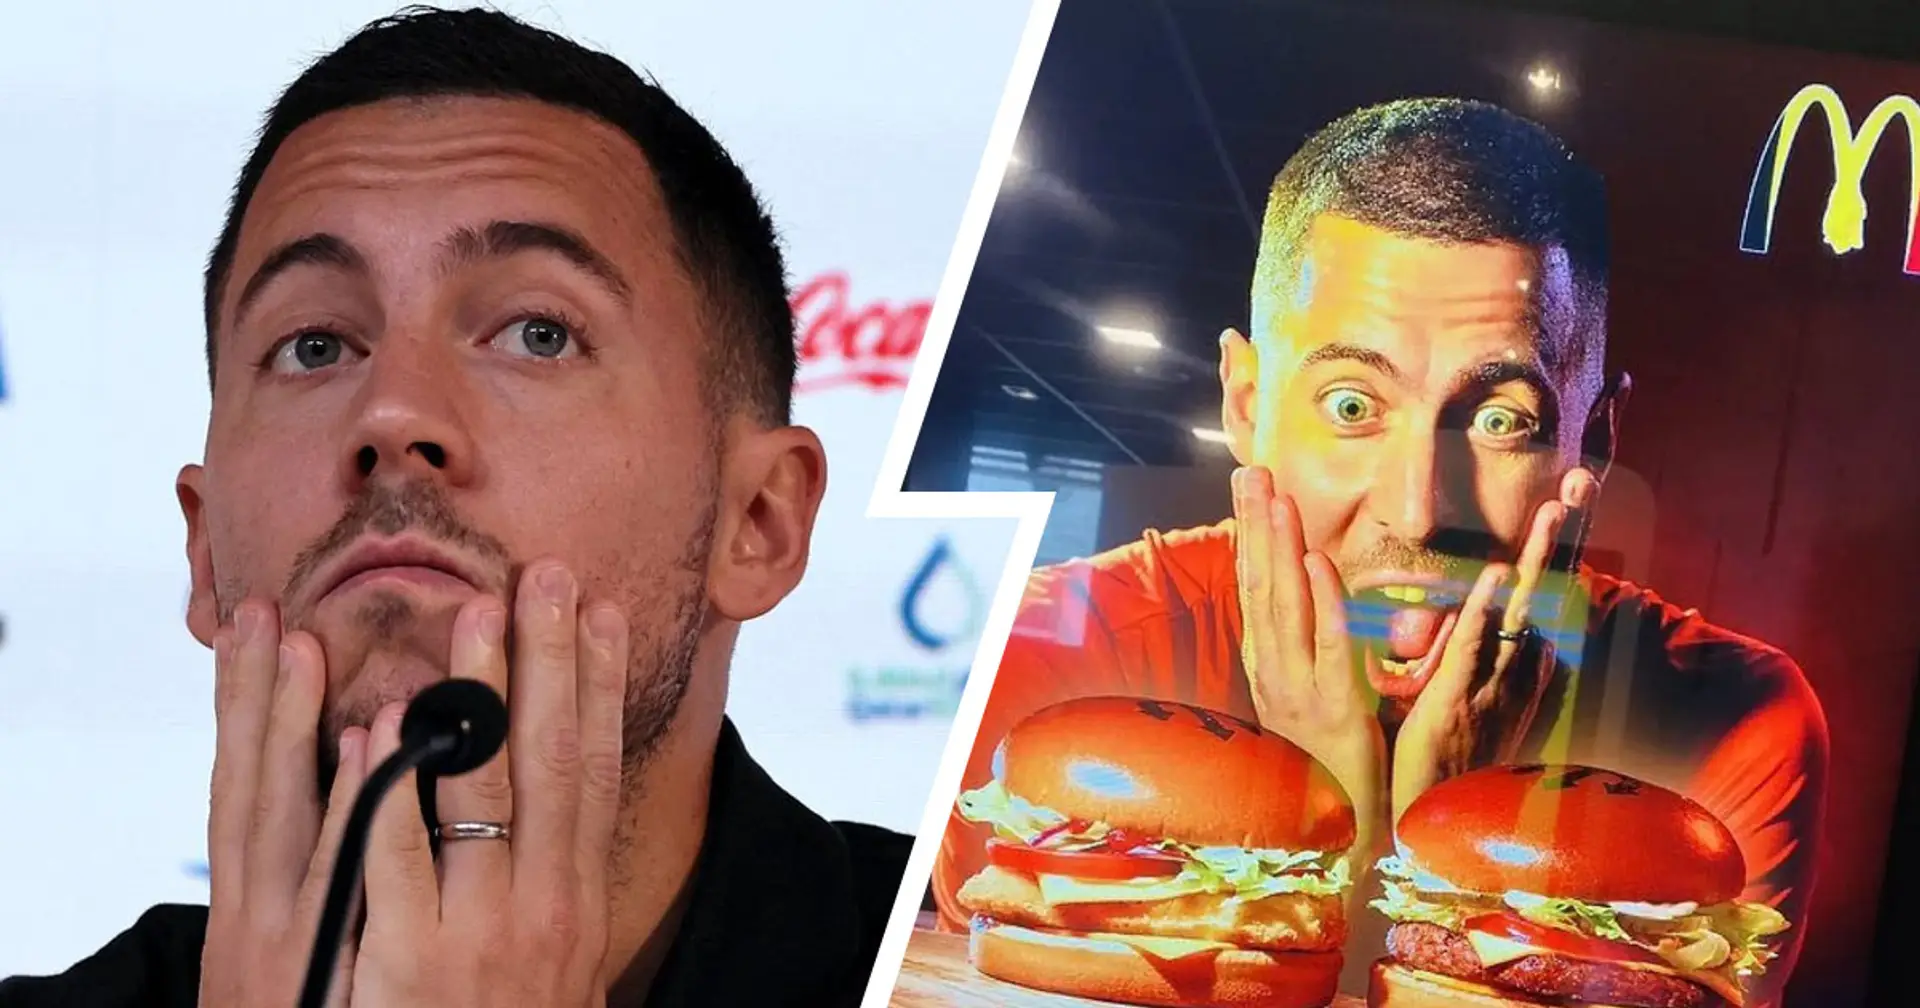 Reporter accuses Hazard of getting fat – follows it up by 'asking him for selfie'